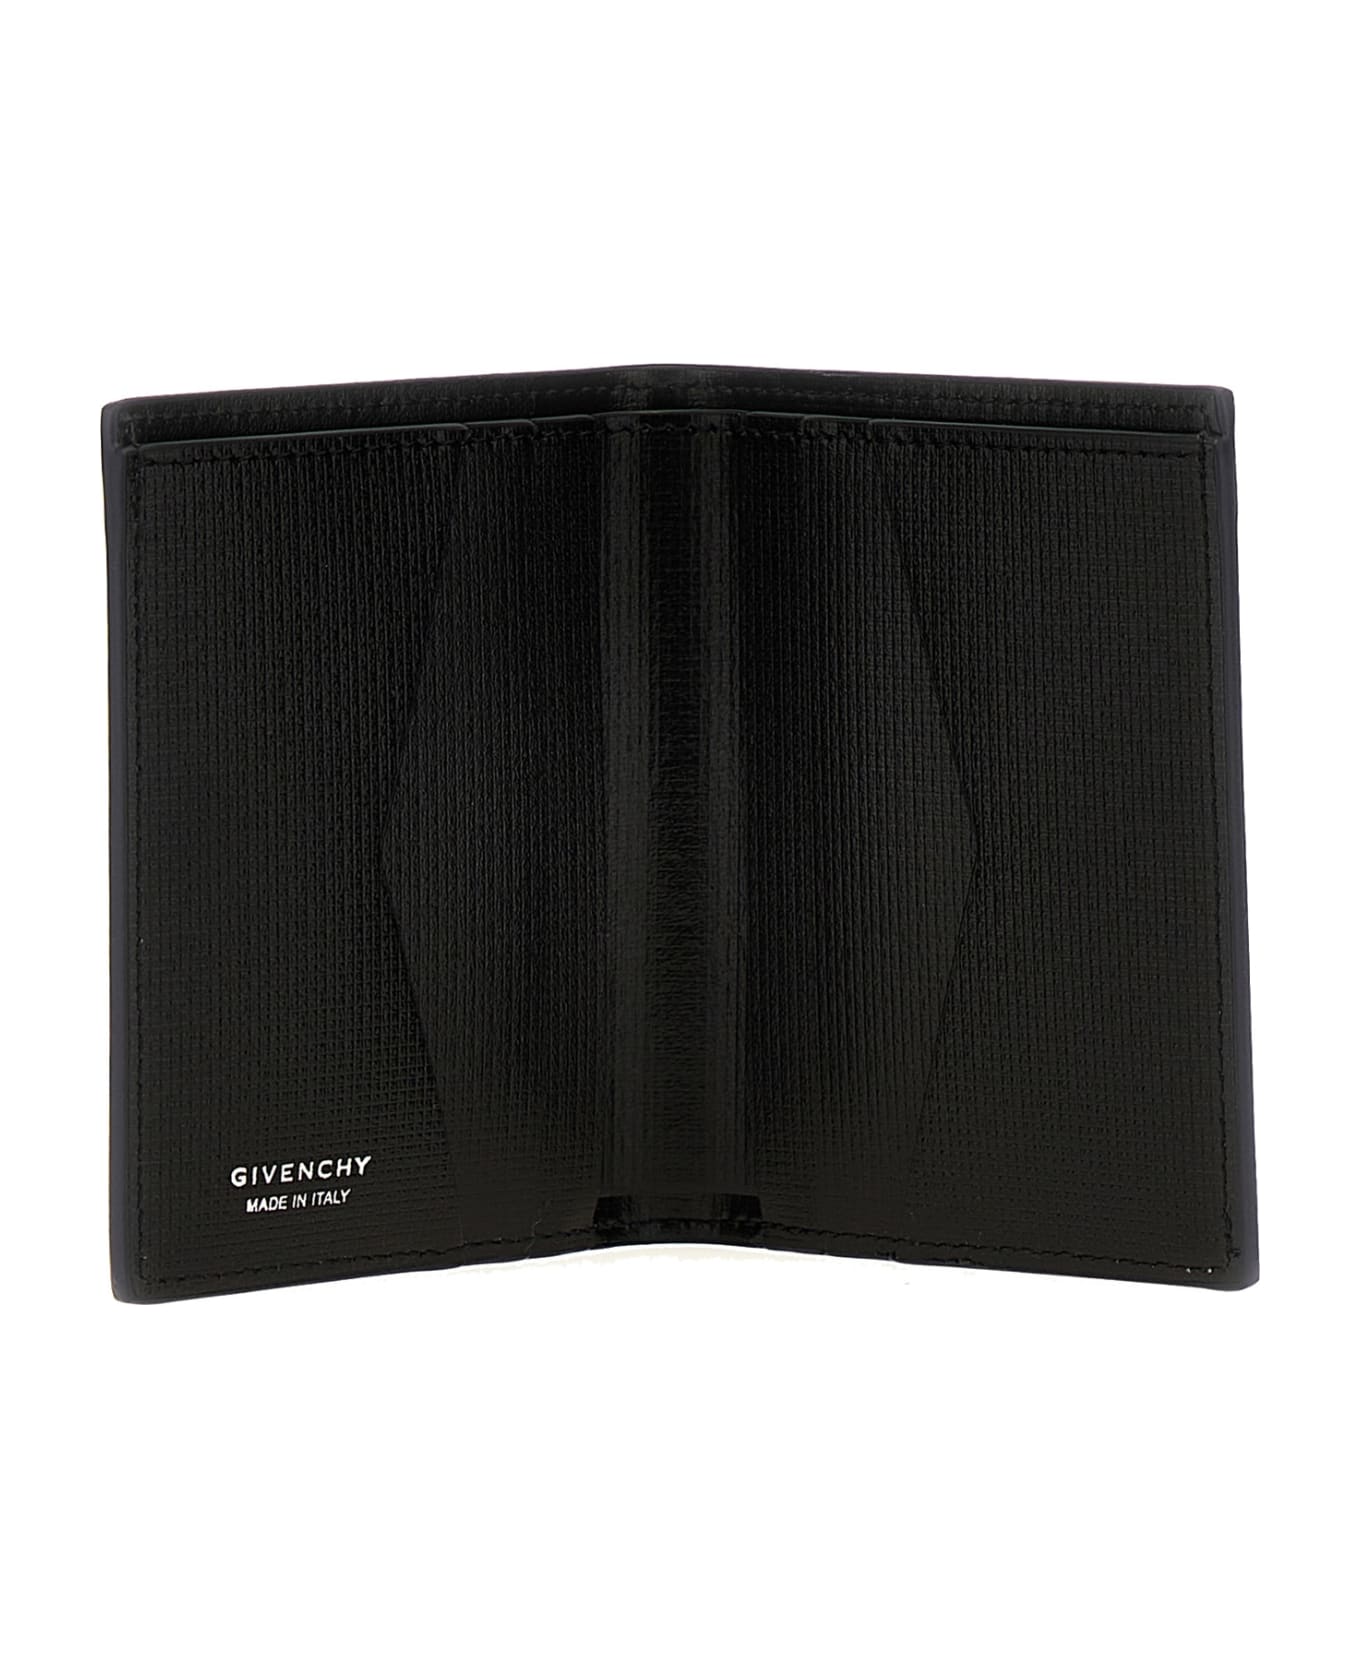 Givenchy 'classique 4g' Card Holder - Multicolor